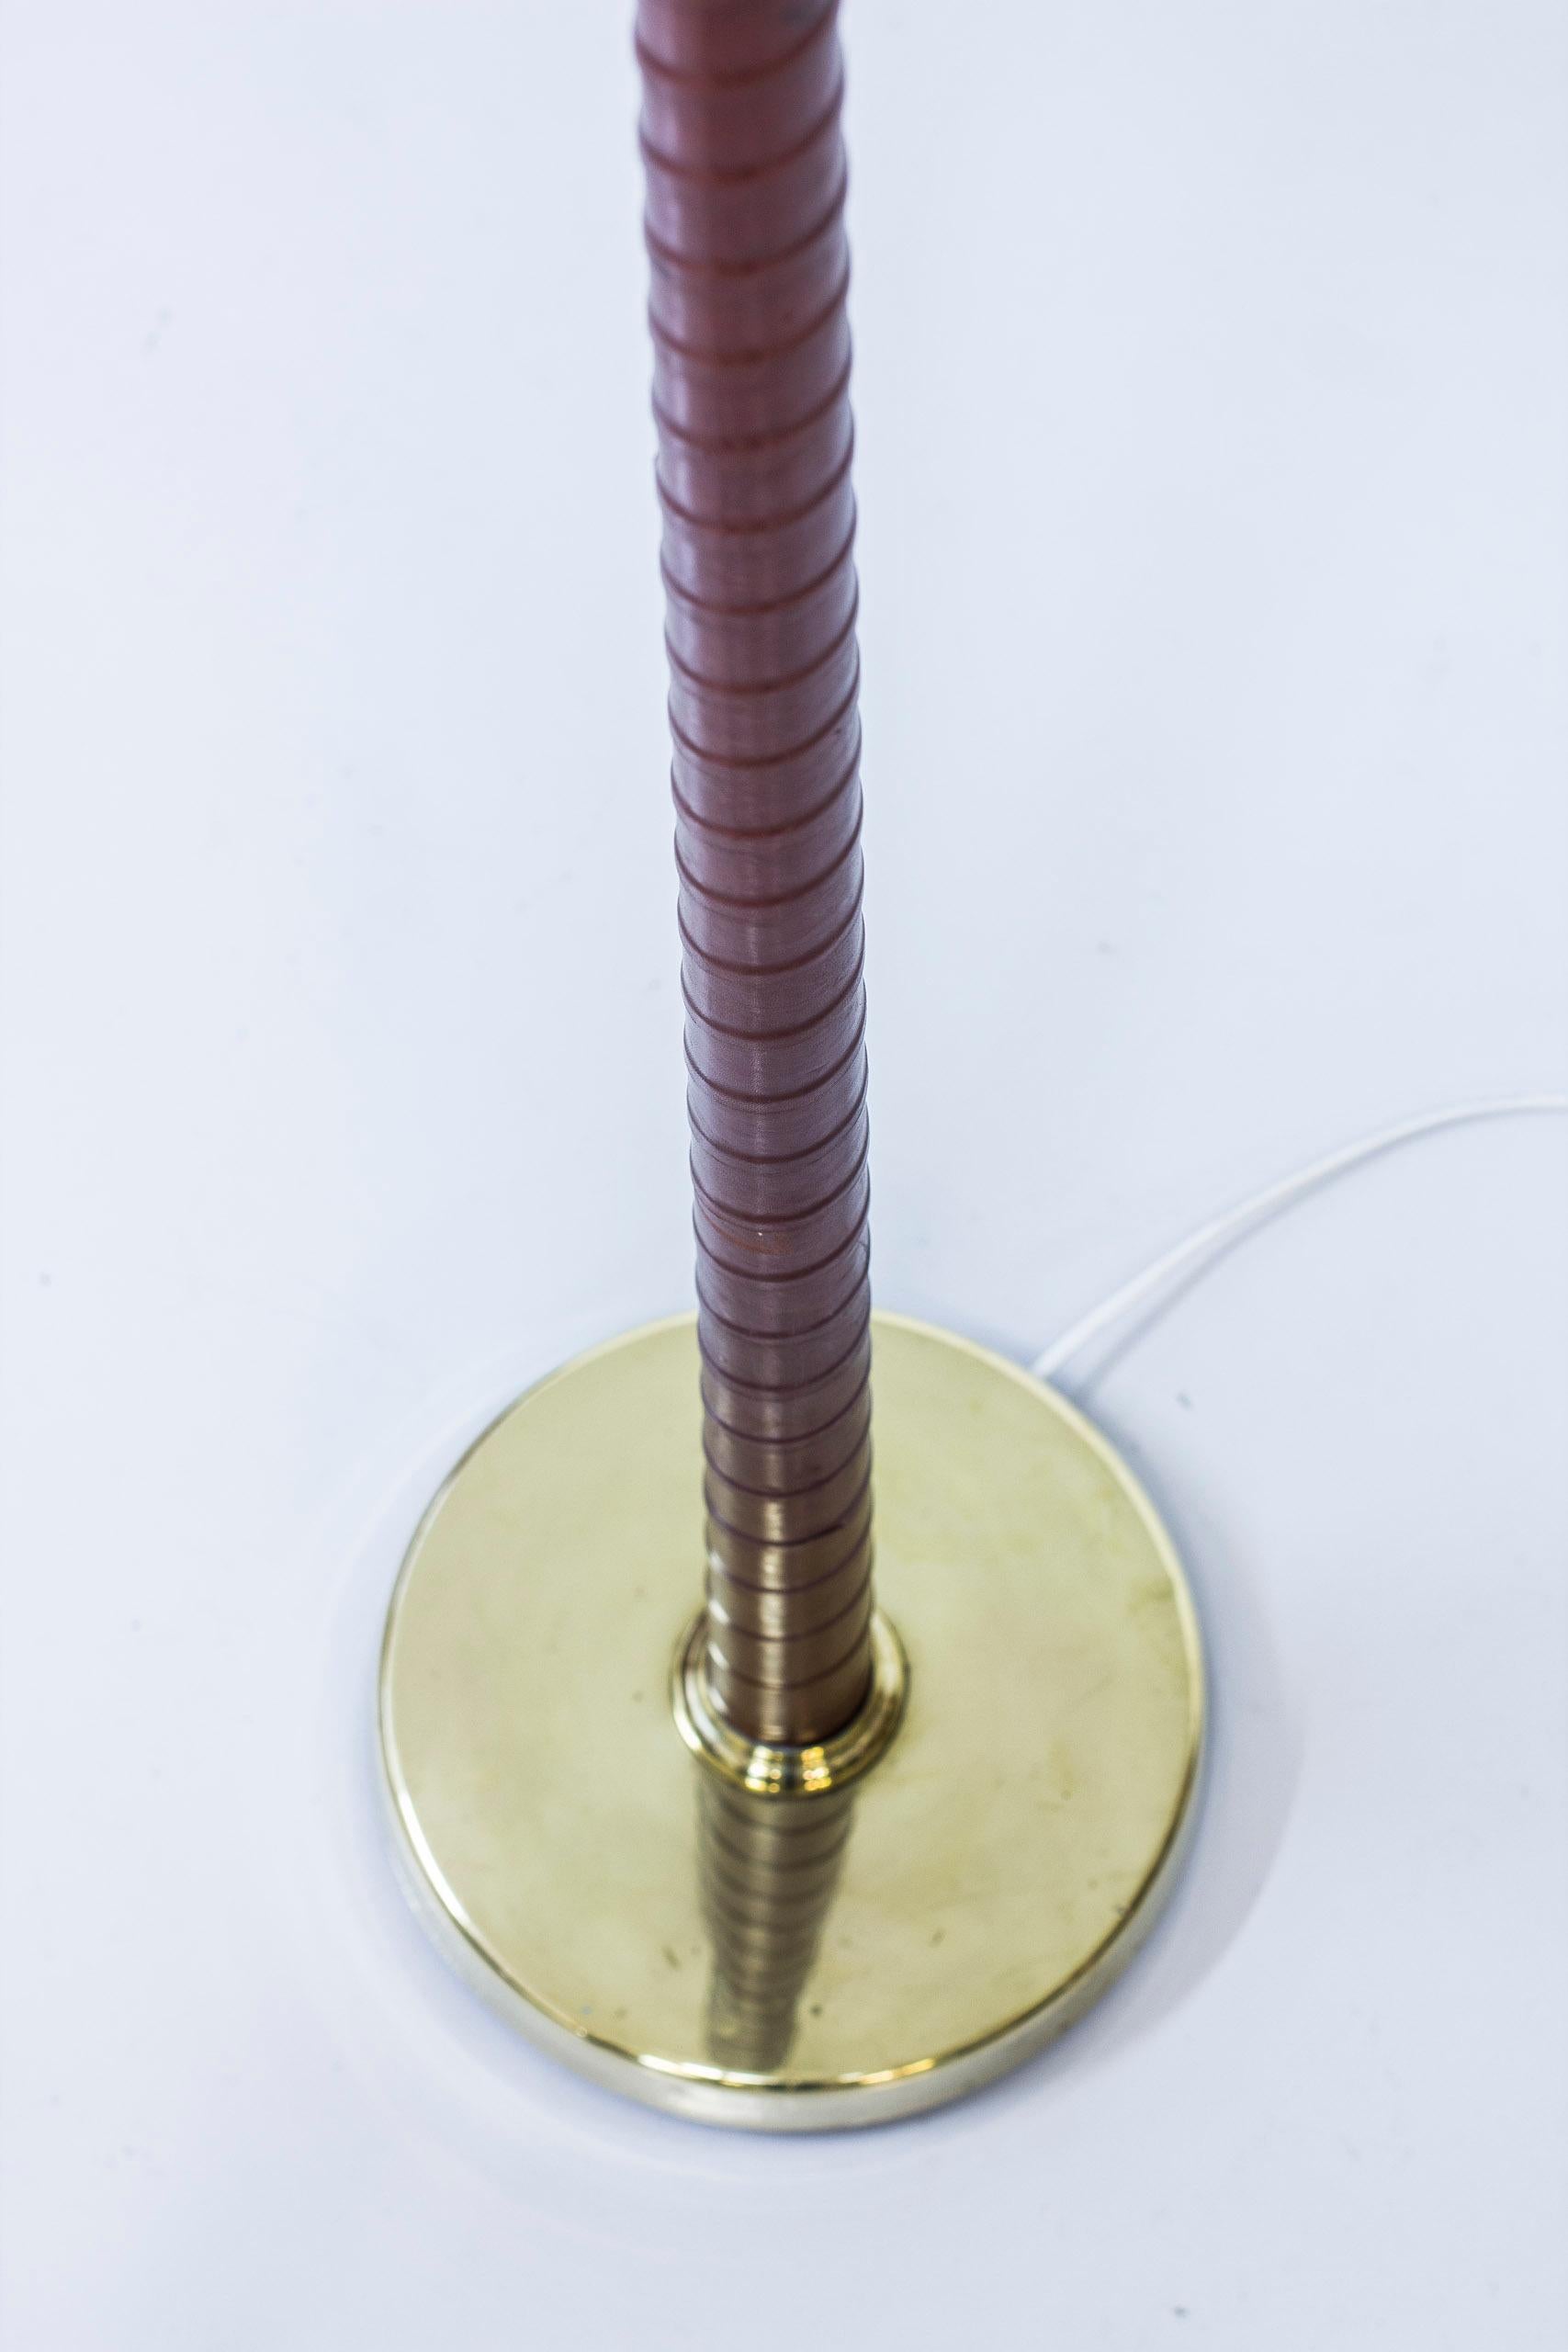 Rare floor lamp designed by Hans Bergström. Produced by his own company Ateljé Lyktan during the 1940s. Made from solid brass with hand wrapped leather in burgundy. Glass diffuser with original lamp shade with new white linen fabric. The lamp has